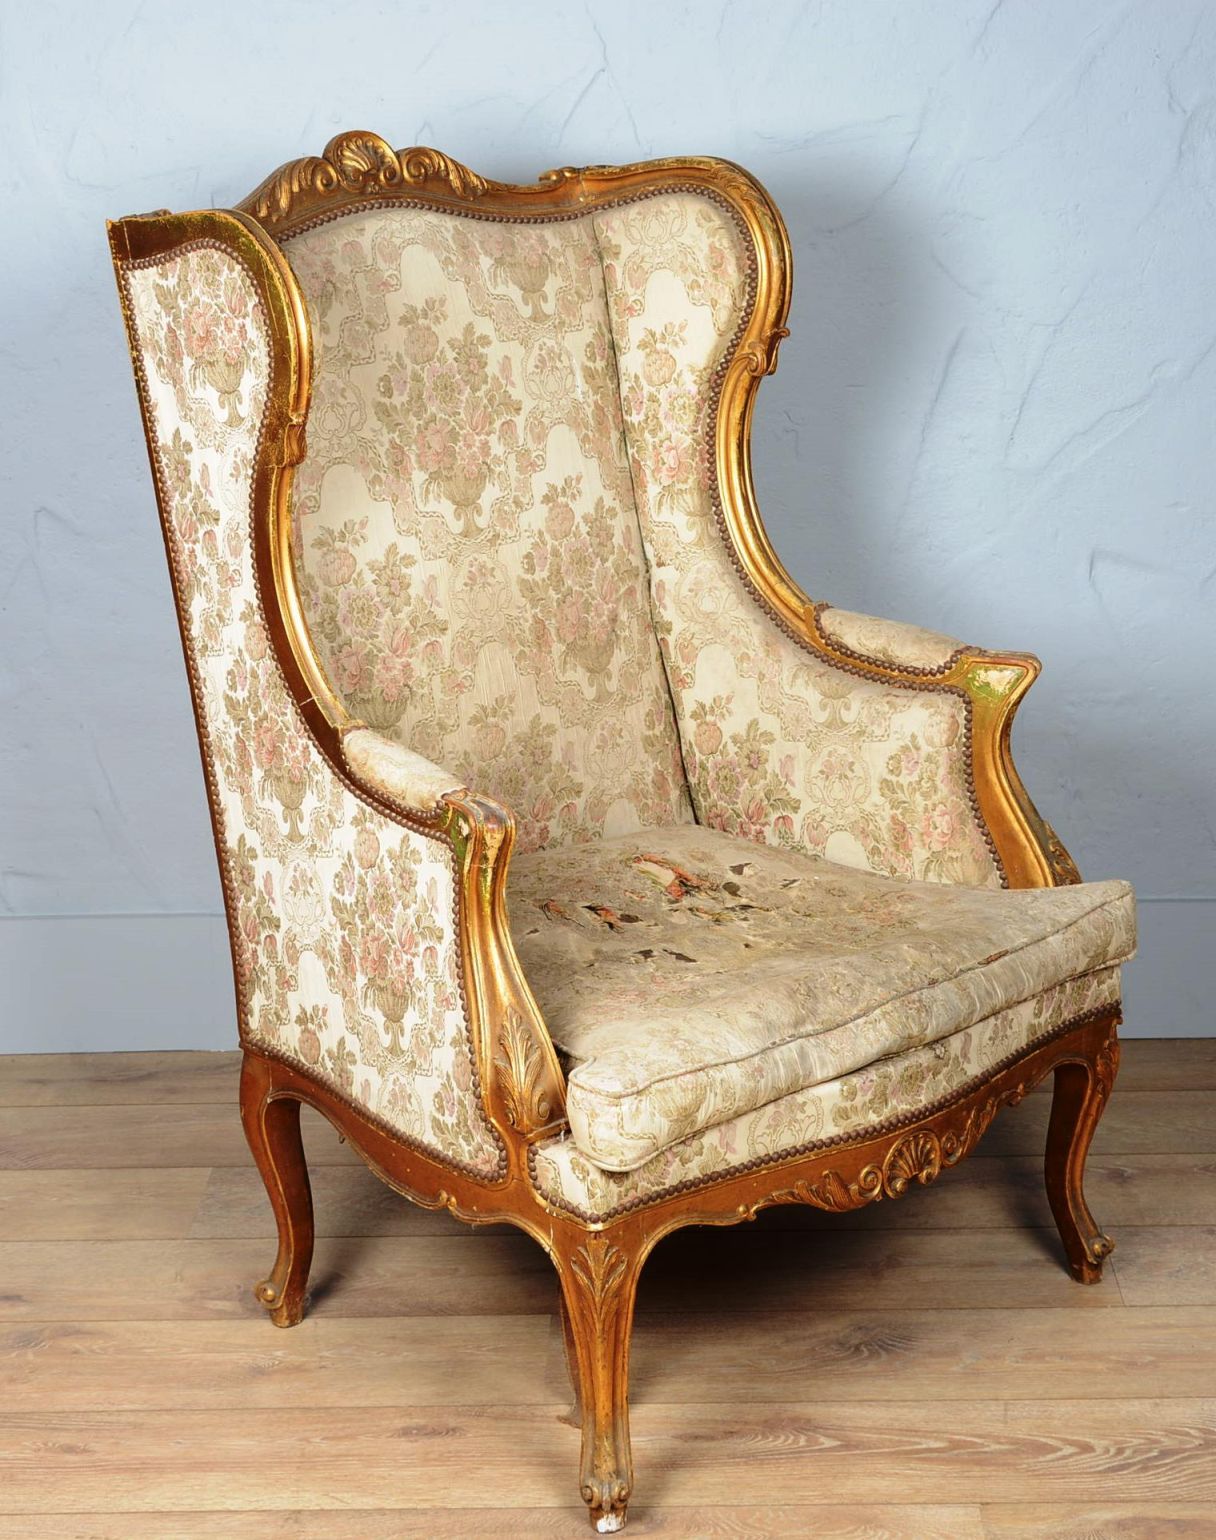 Grand fauteuil à oreilles Large armchair with ears in carved and gilded wood.

L&hellip;